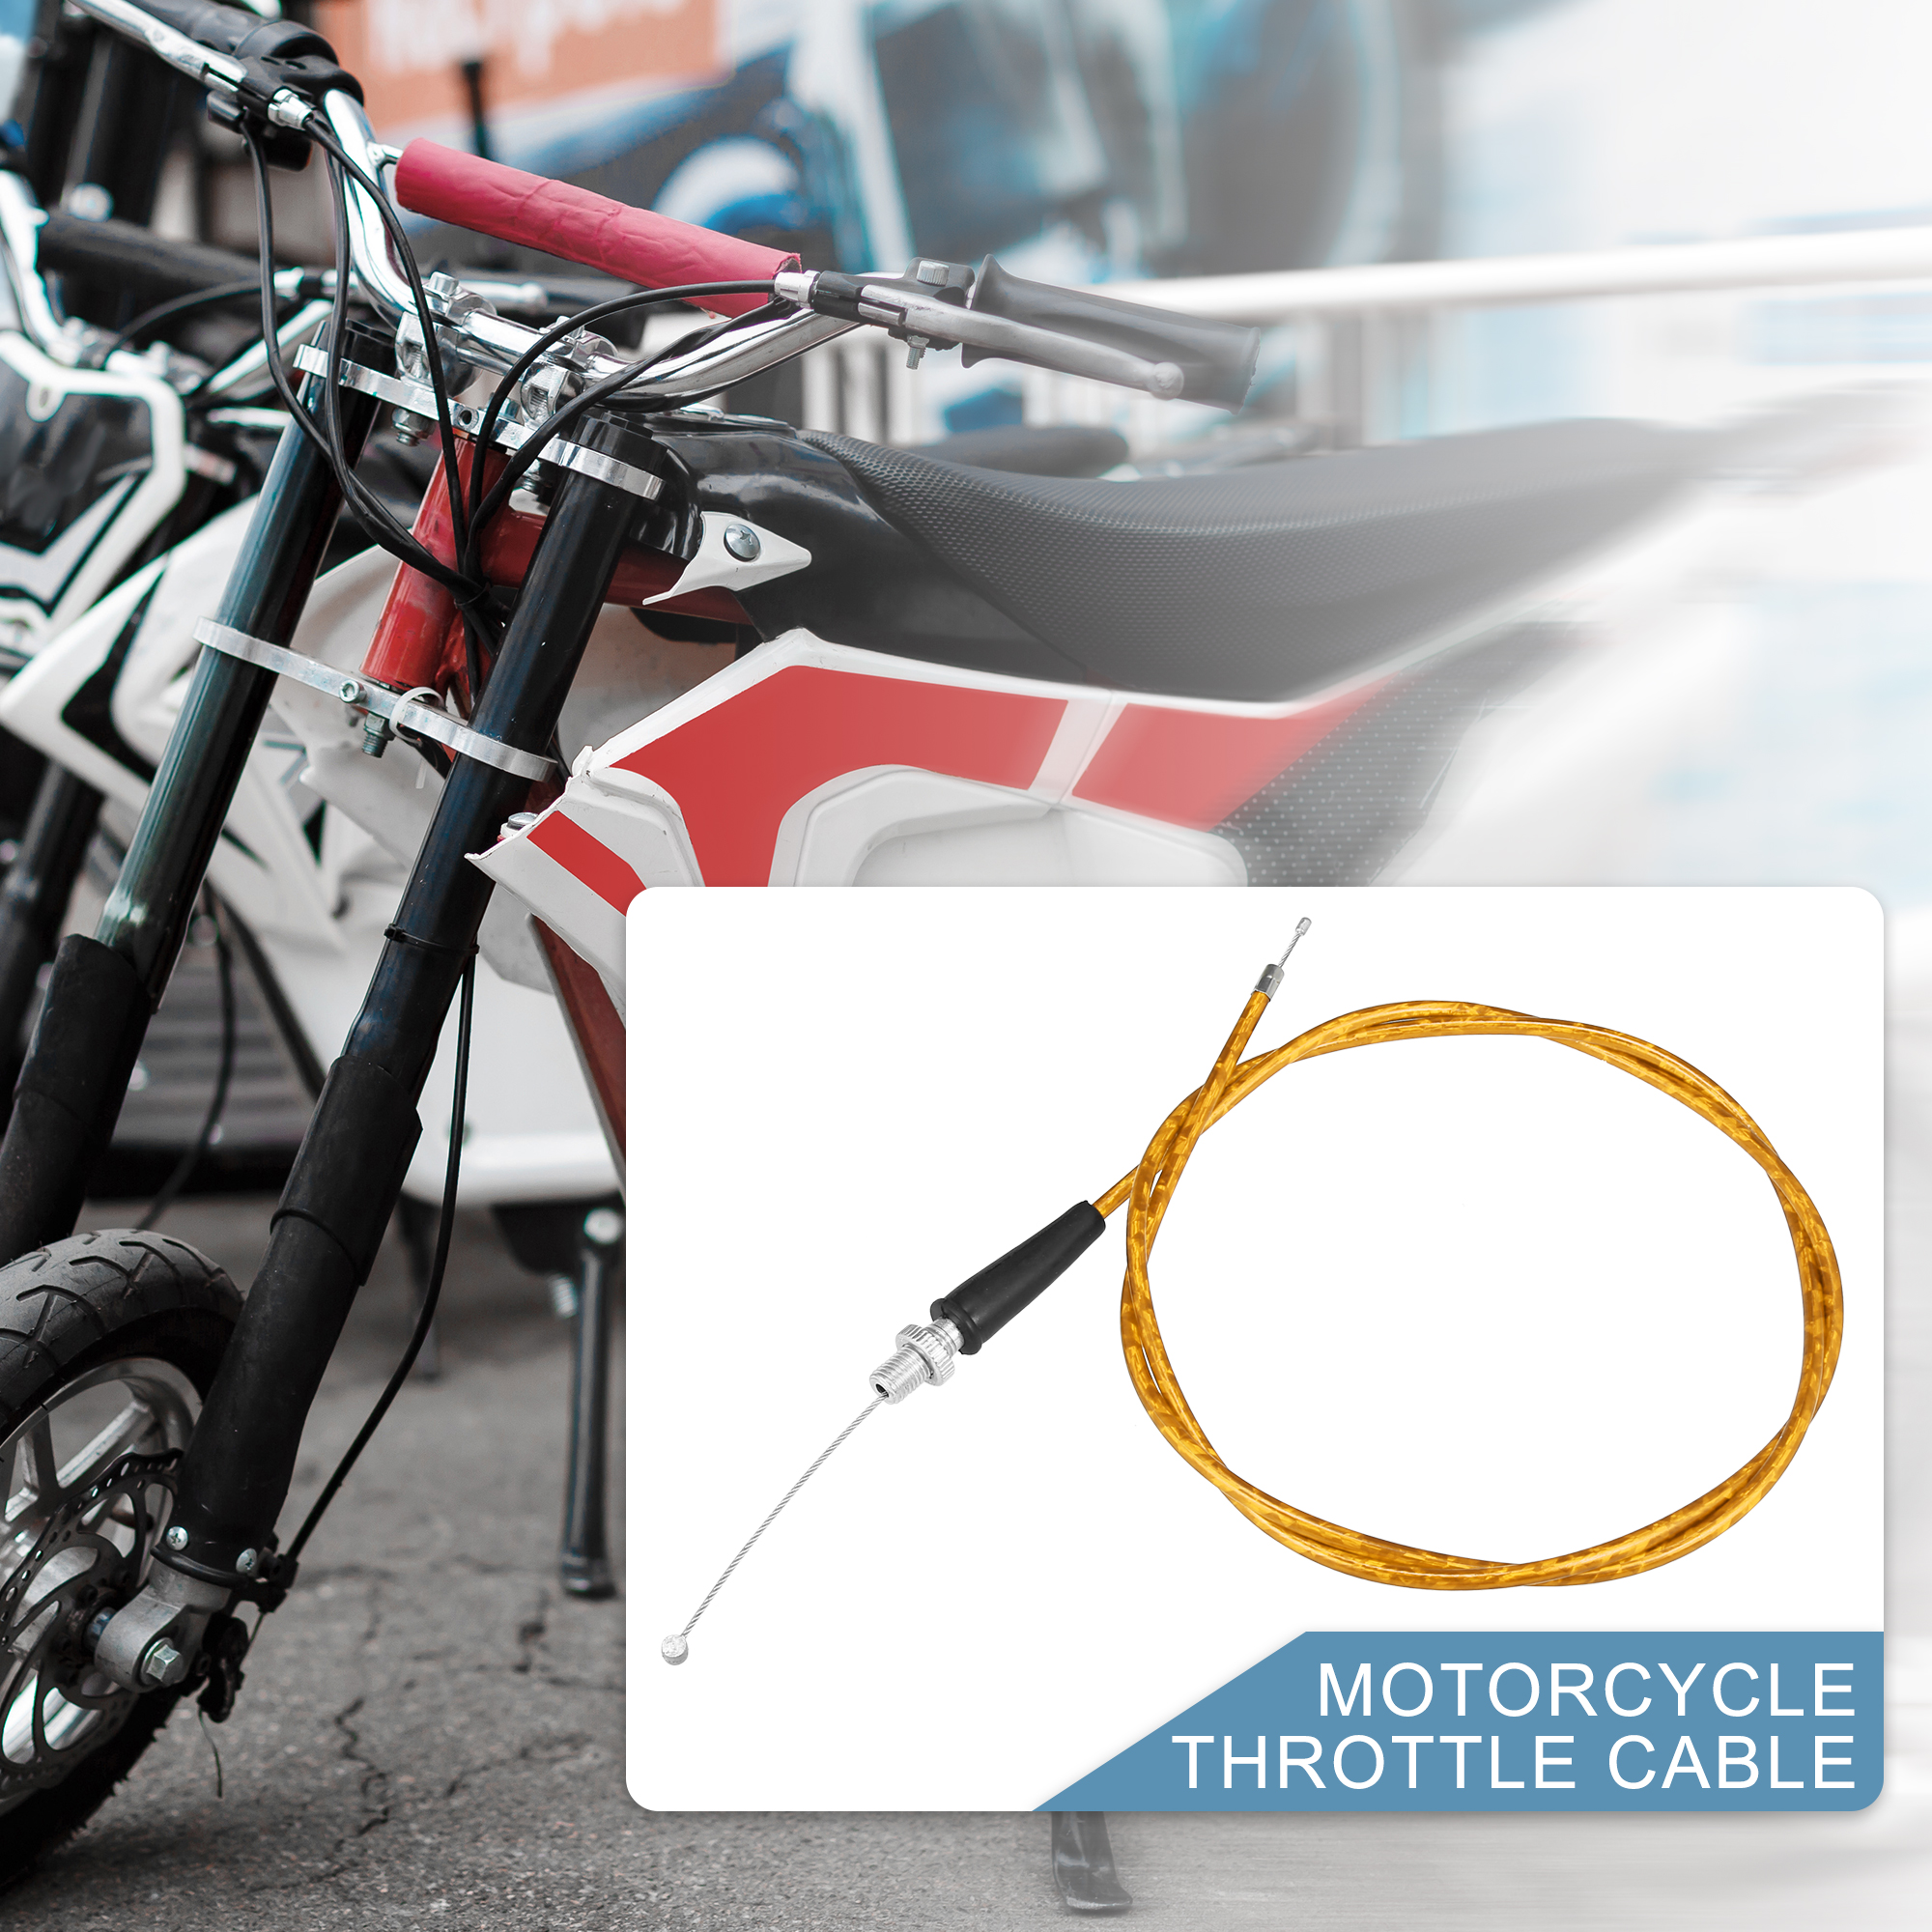 Unique Bargains Motorcycle Gas Throttle Cable 50 Inch for Mini Bike MB165 196cc 5.5hp Yellow